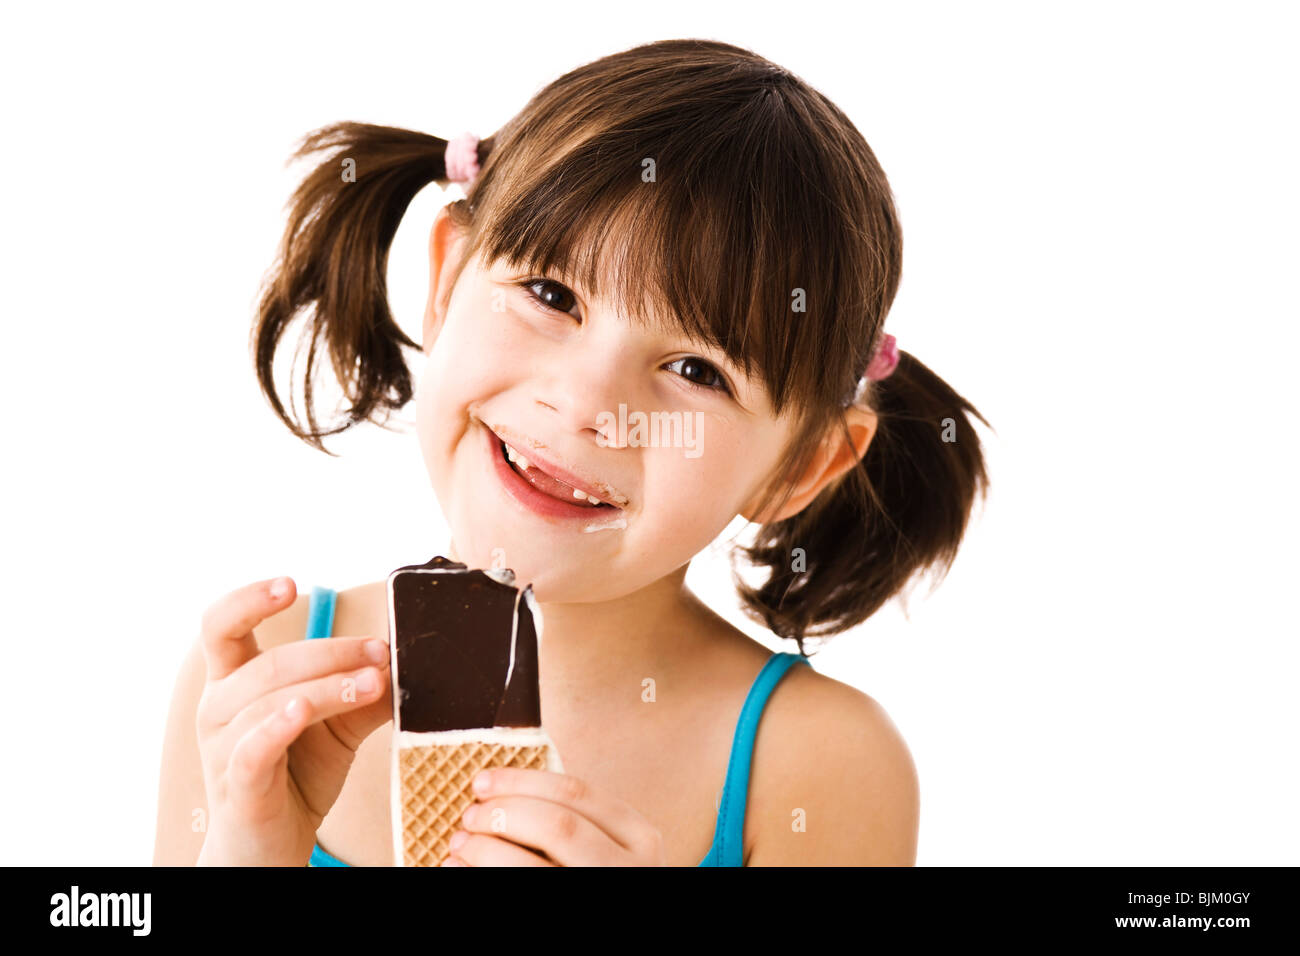 Little girl with pigtails eating ice cream Stock Photo